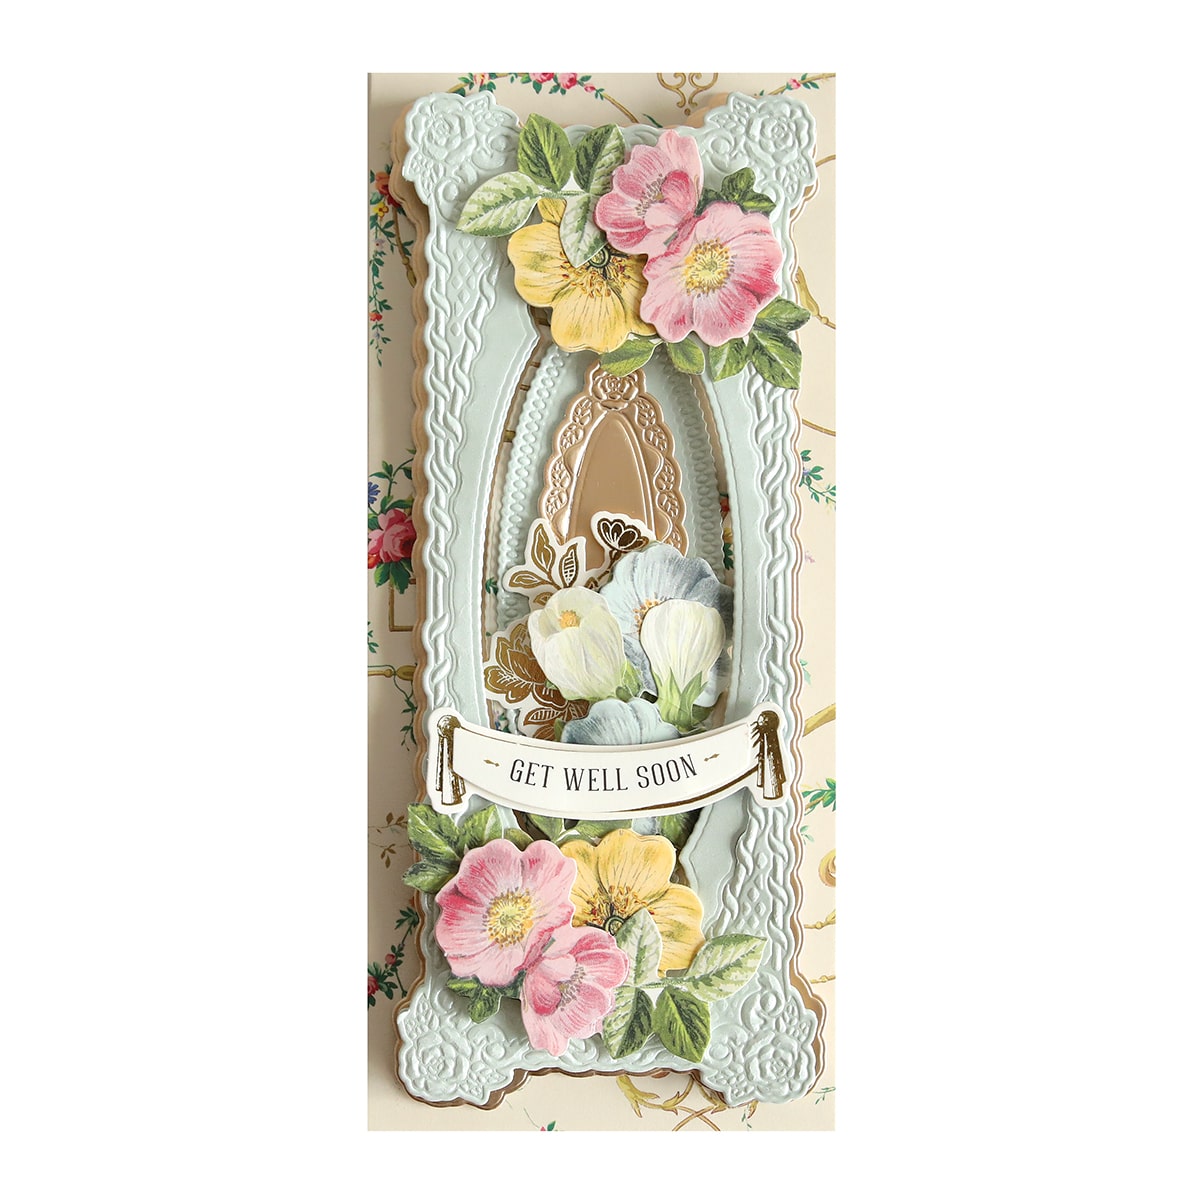 An easter card with flowers on it.